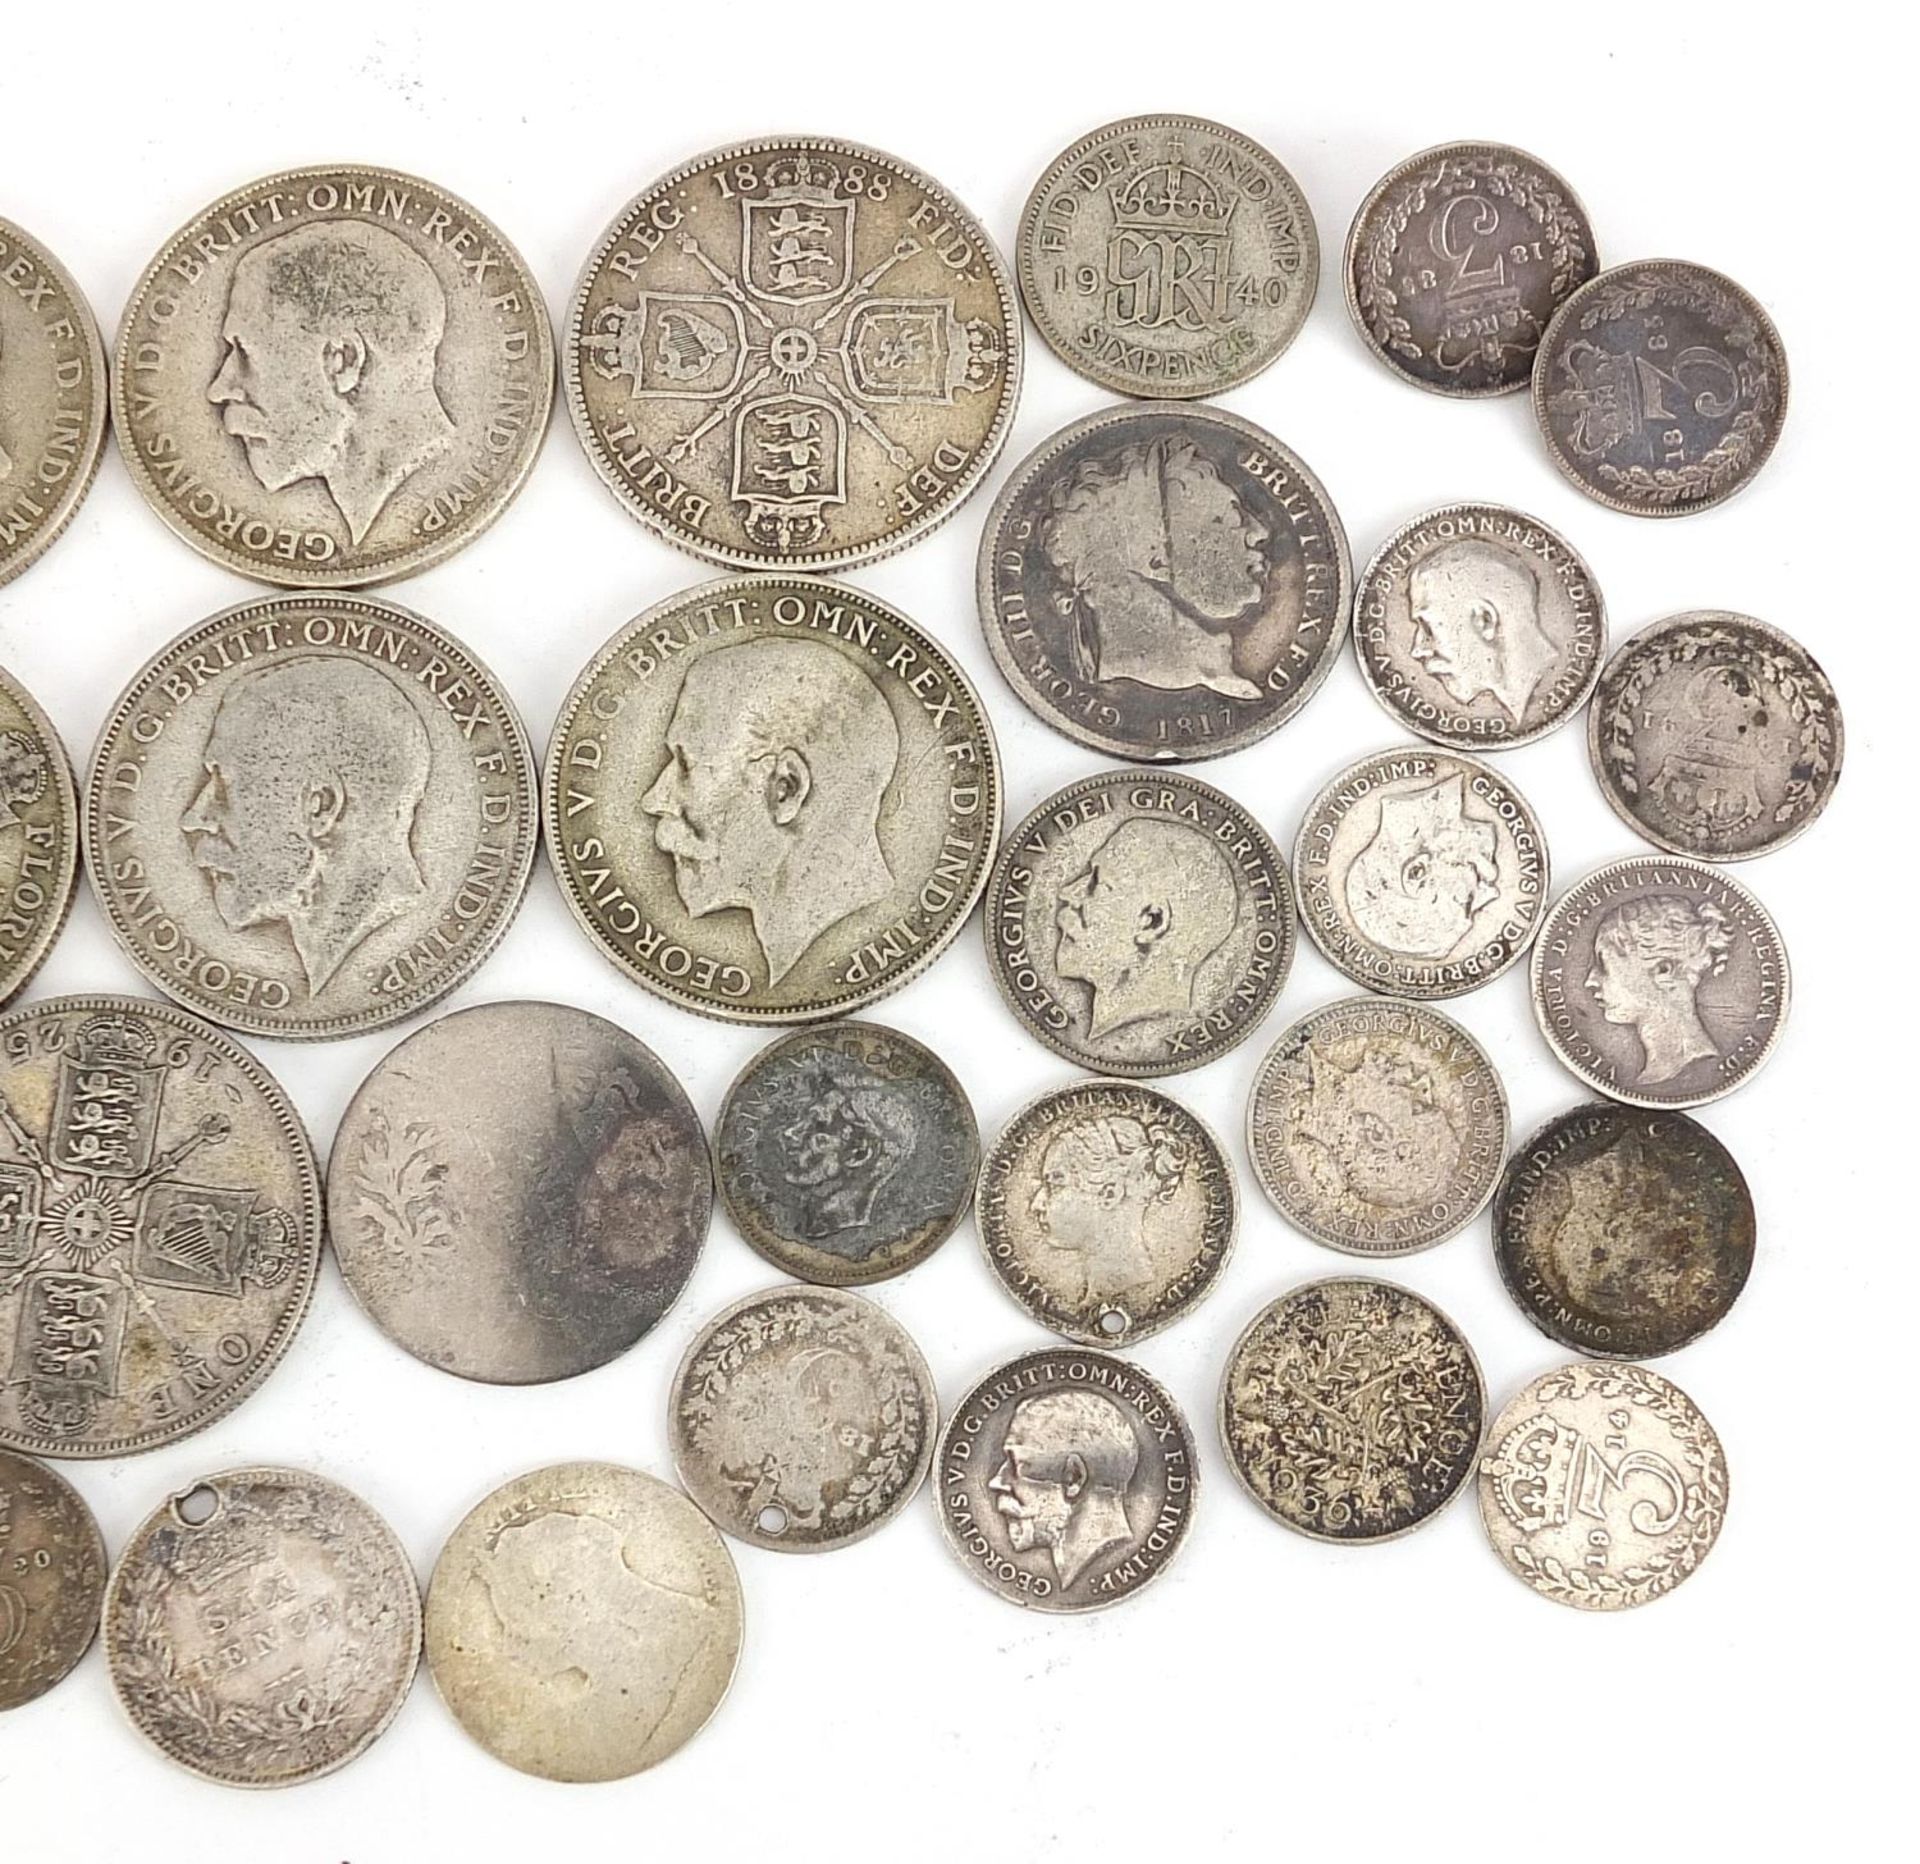 Victorian and later British coinage including florins, shillings and sixpences, 200g - Image 3 of 3